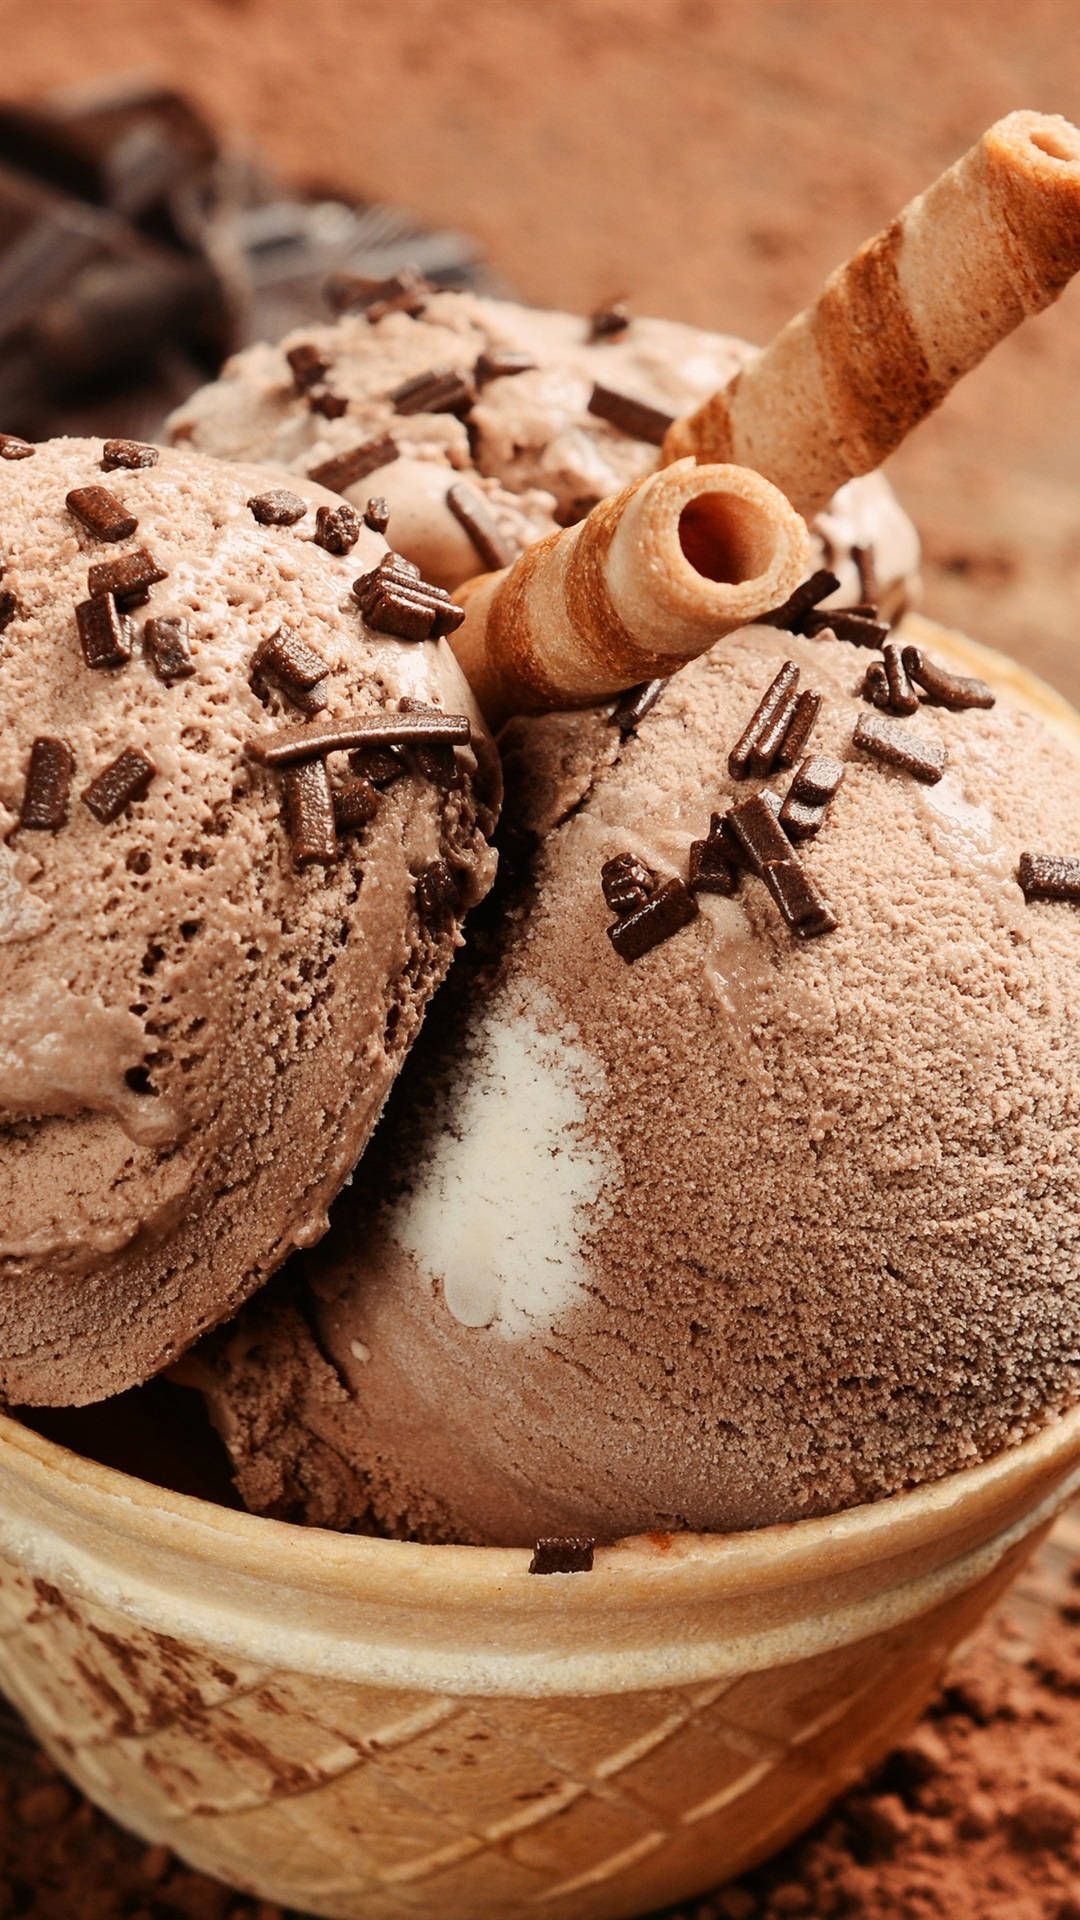 A bowl of chocolate ice cream with toppings - Ice cream, chocolate